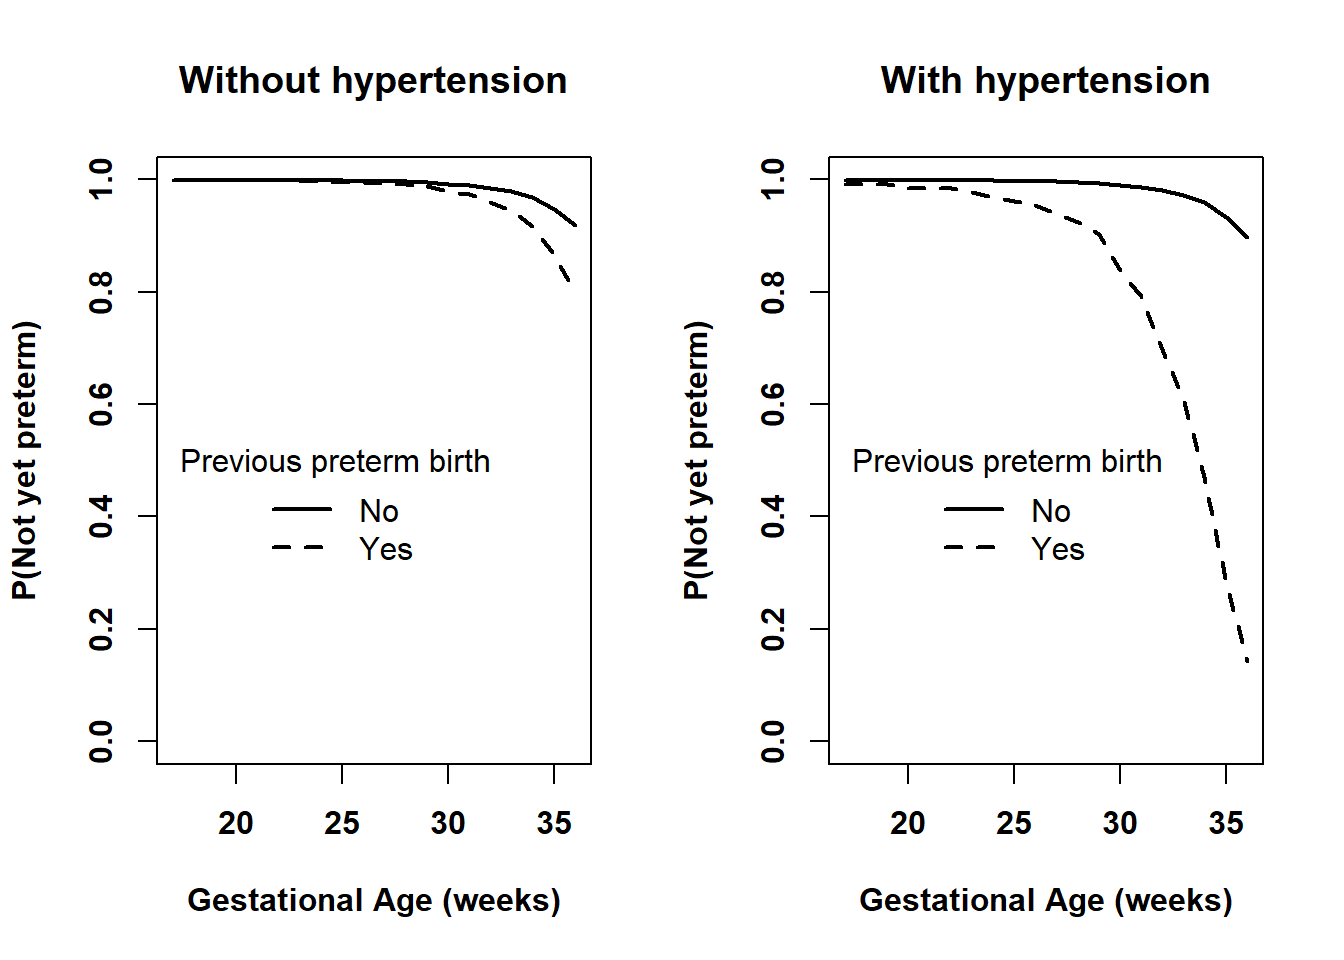 Comparing the survival functions between those without and with previous preterm birth at each level of pre-pregnancy hypertension